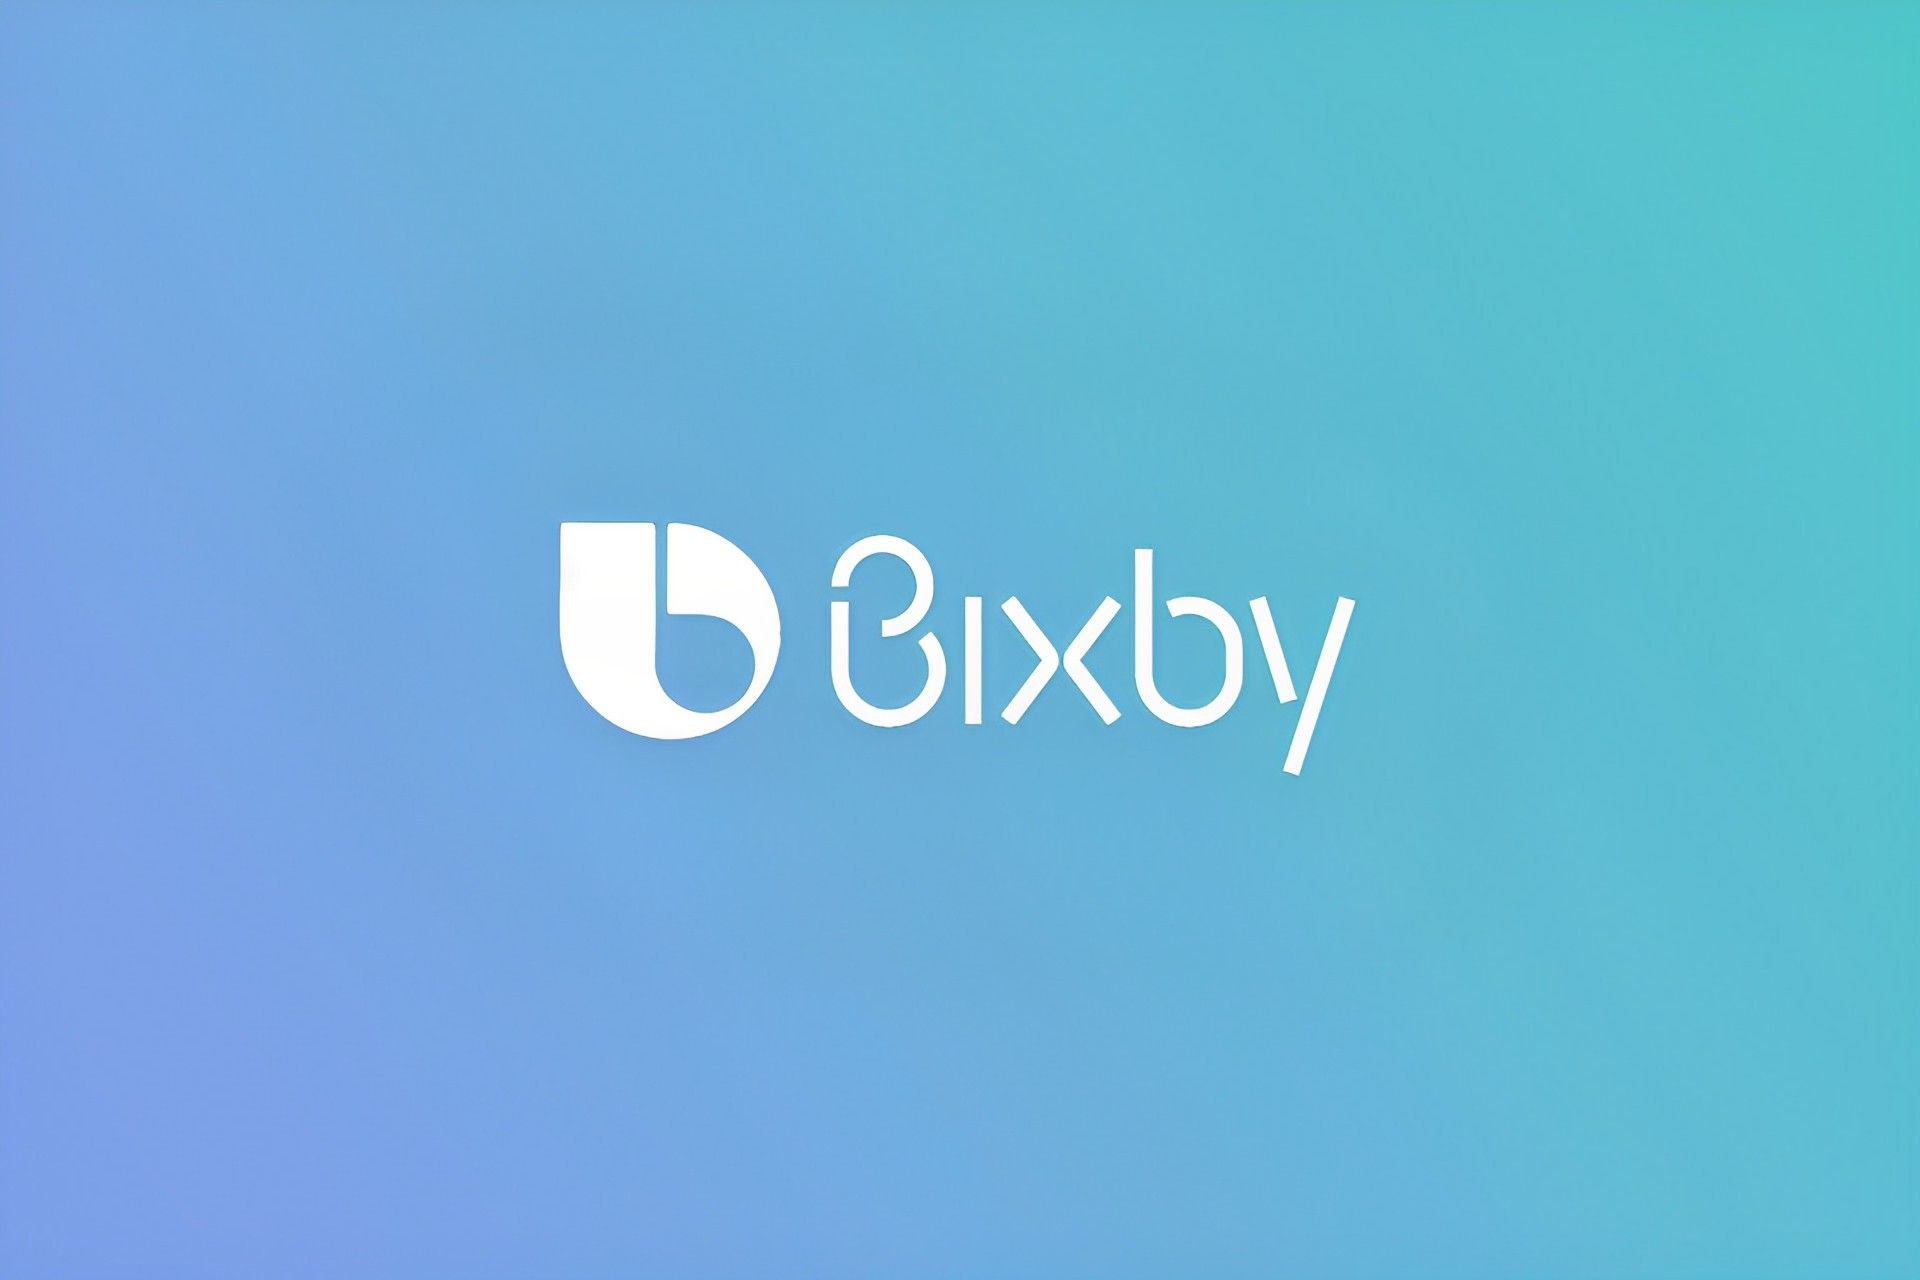 how to use bixby text call